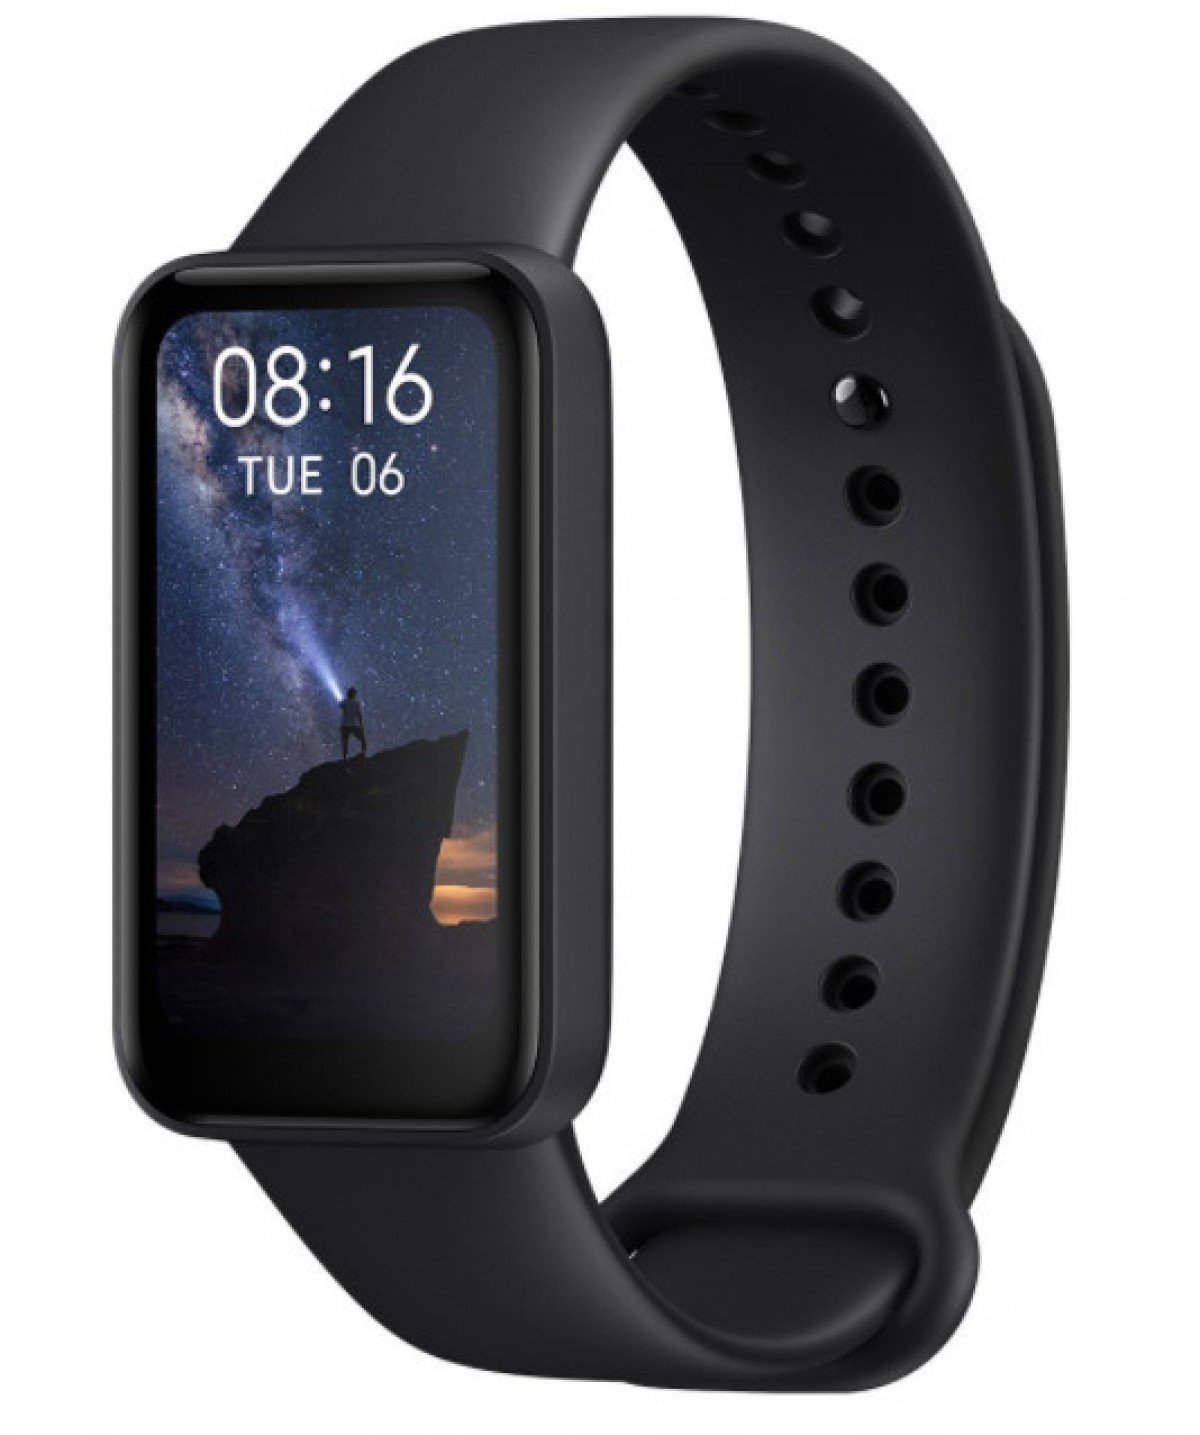 Redmi Smart Band Pro announced with 1.47'' OLED display